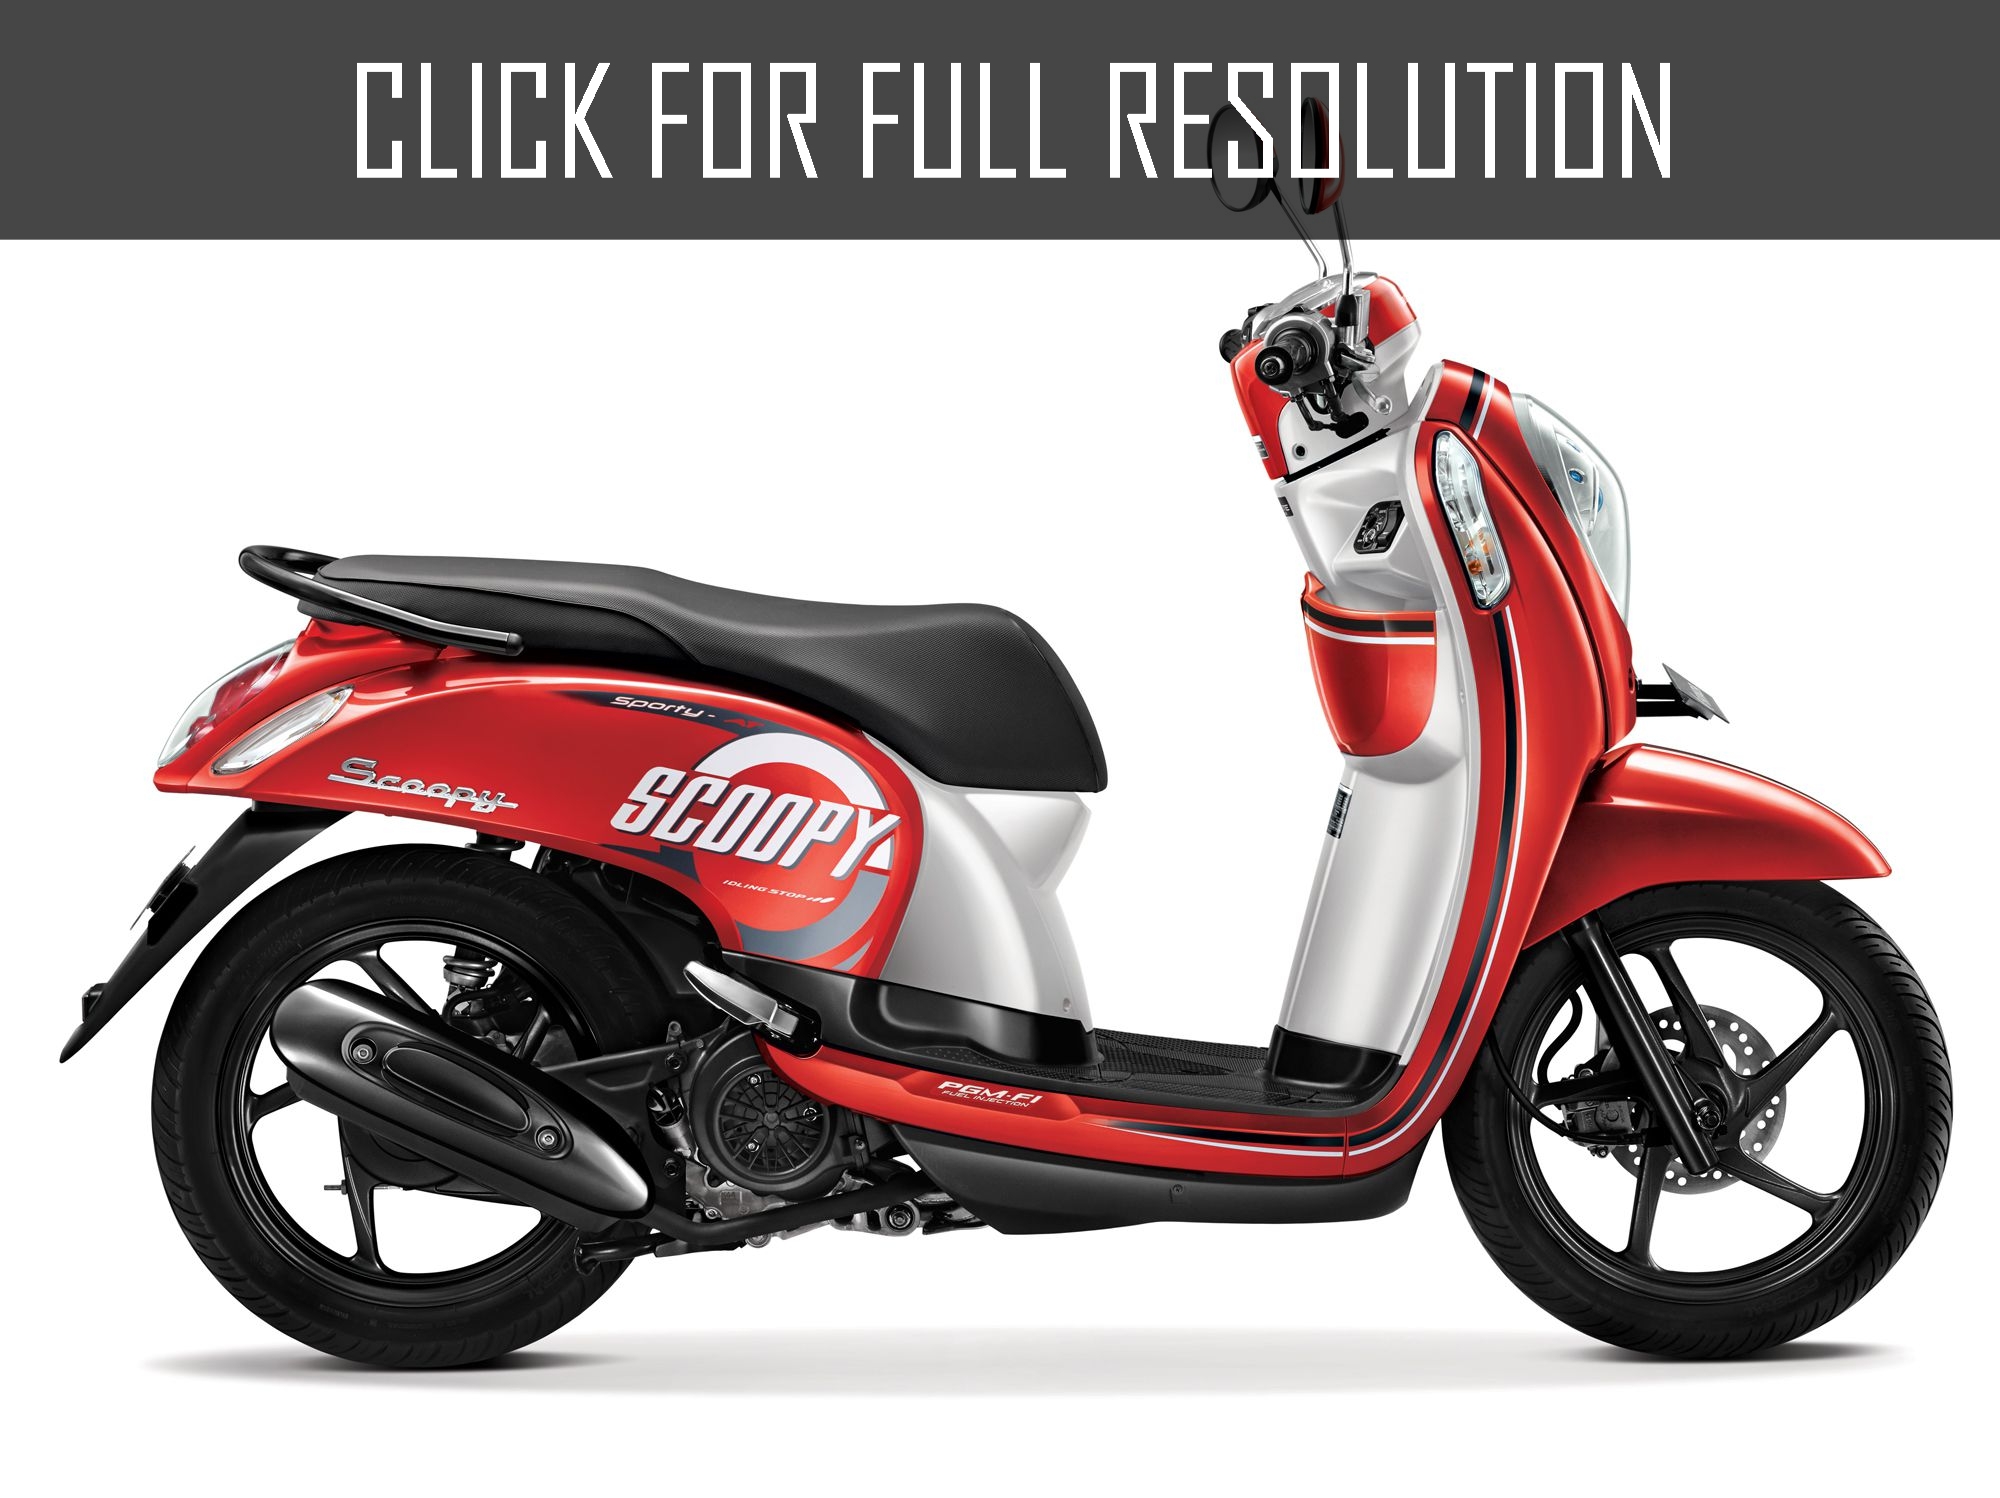 Honda Scoopy Fi - reviews, prices, ratings with various photos